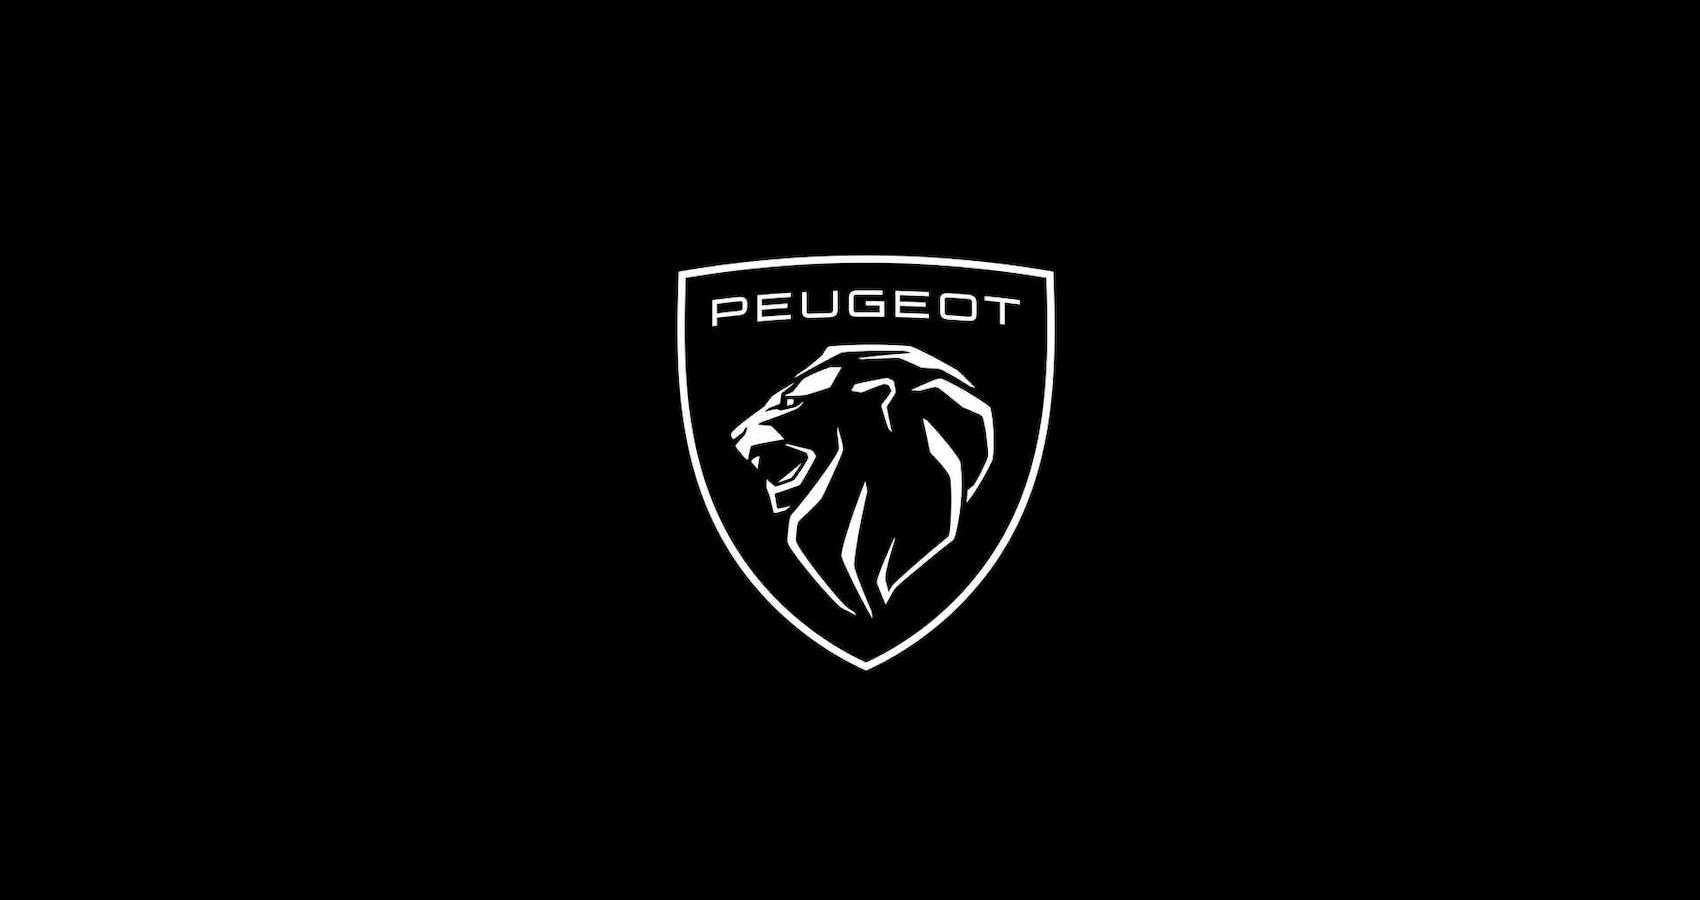 This Is The True Meaning Behind The Peugeot Logo